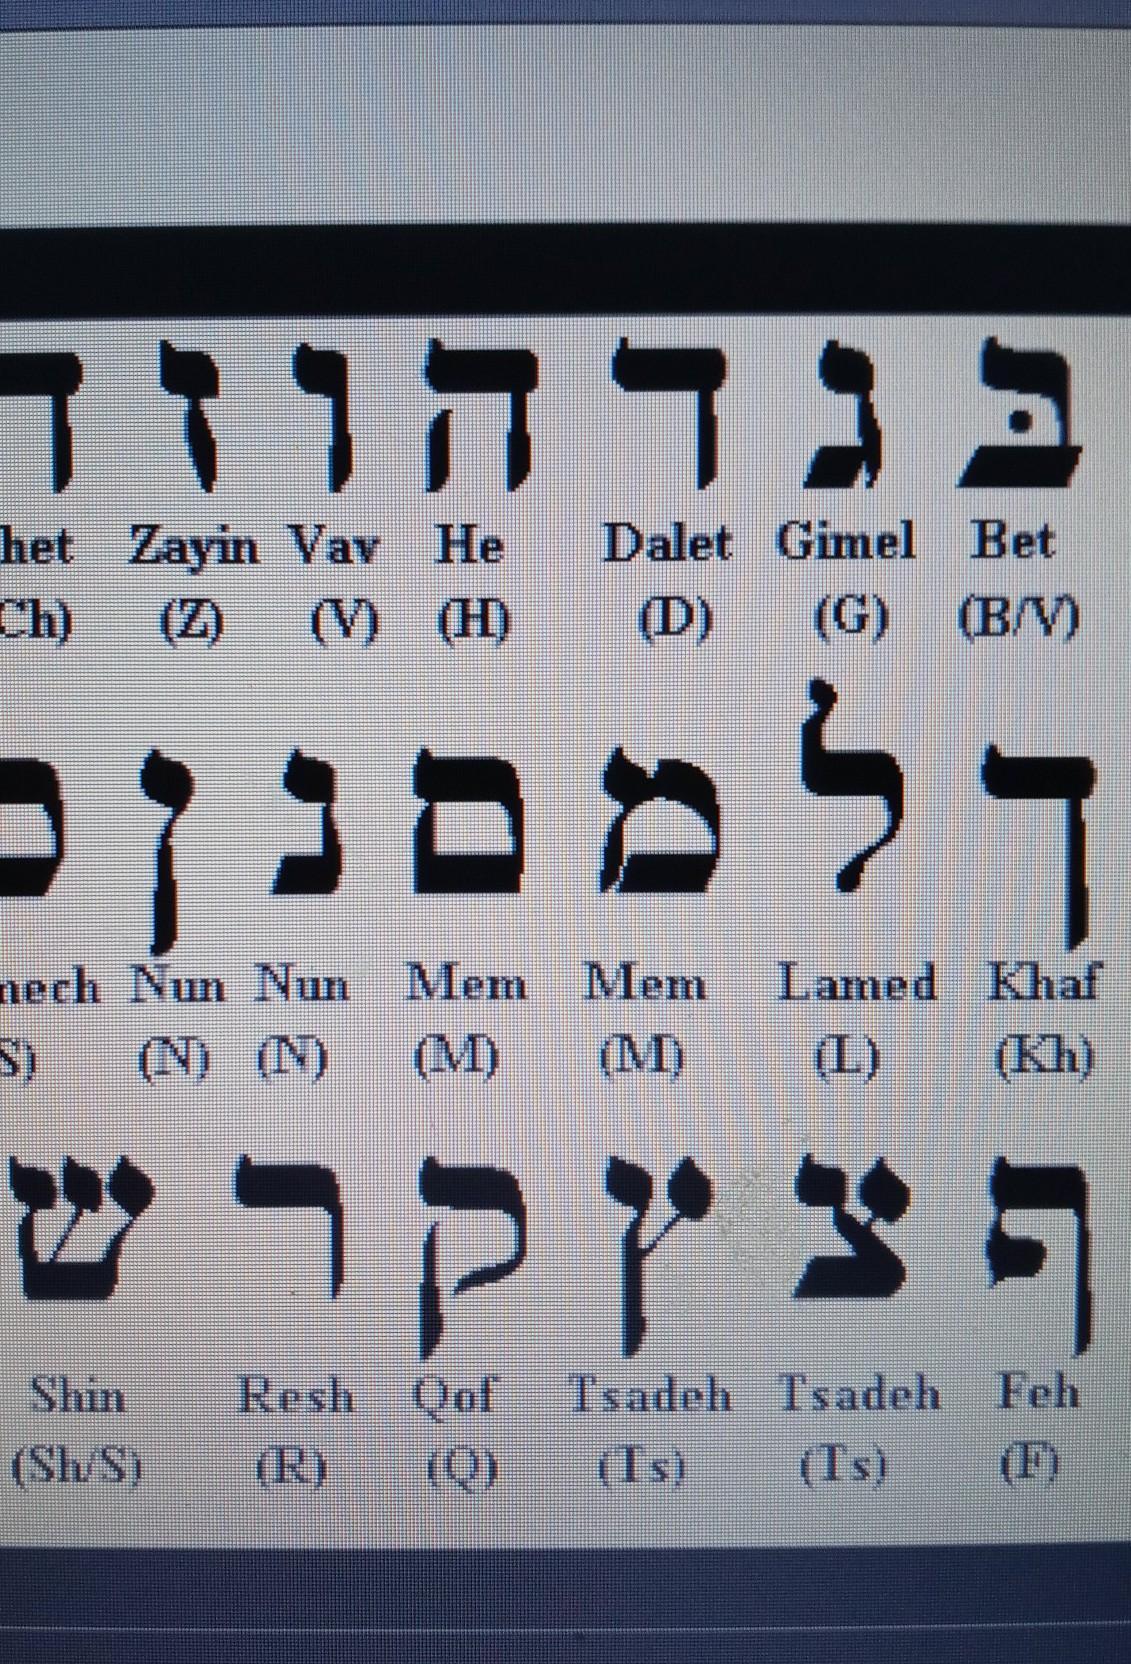 Can I Have The Old Old Hebrew Alphabet Plz Have The Lesser Book Of Solomon And I Can't Understand It.